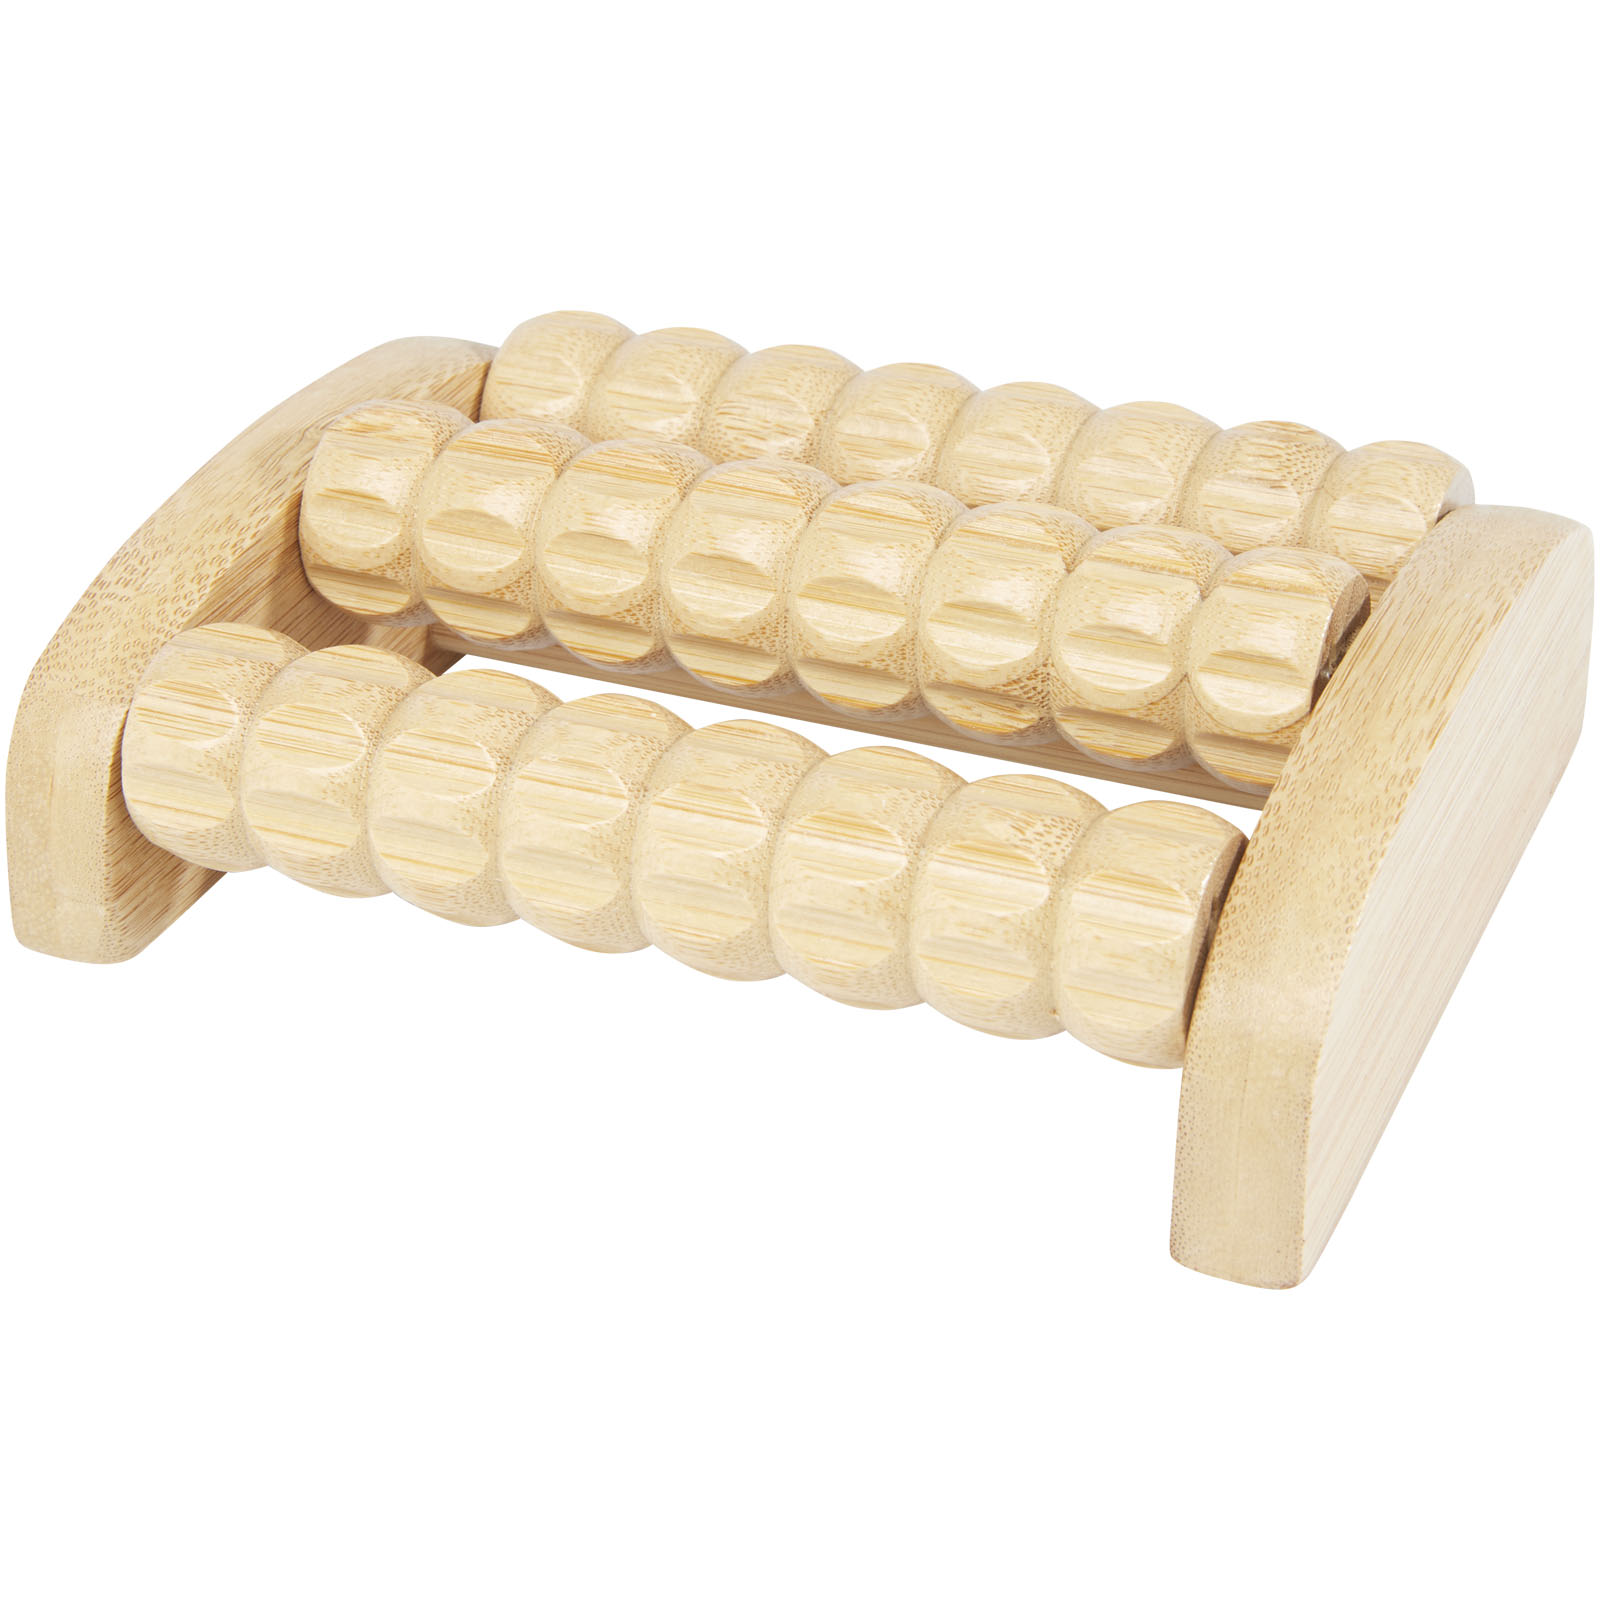 Advertising Personal Care - Venis bamboo foot massager